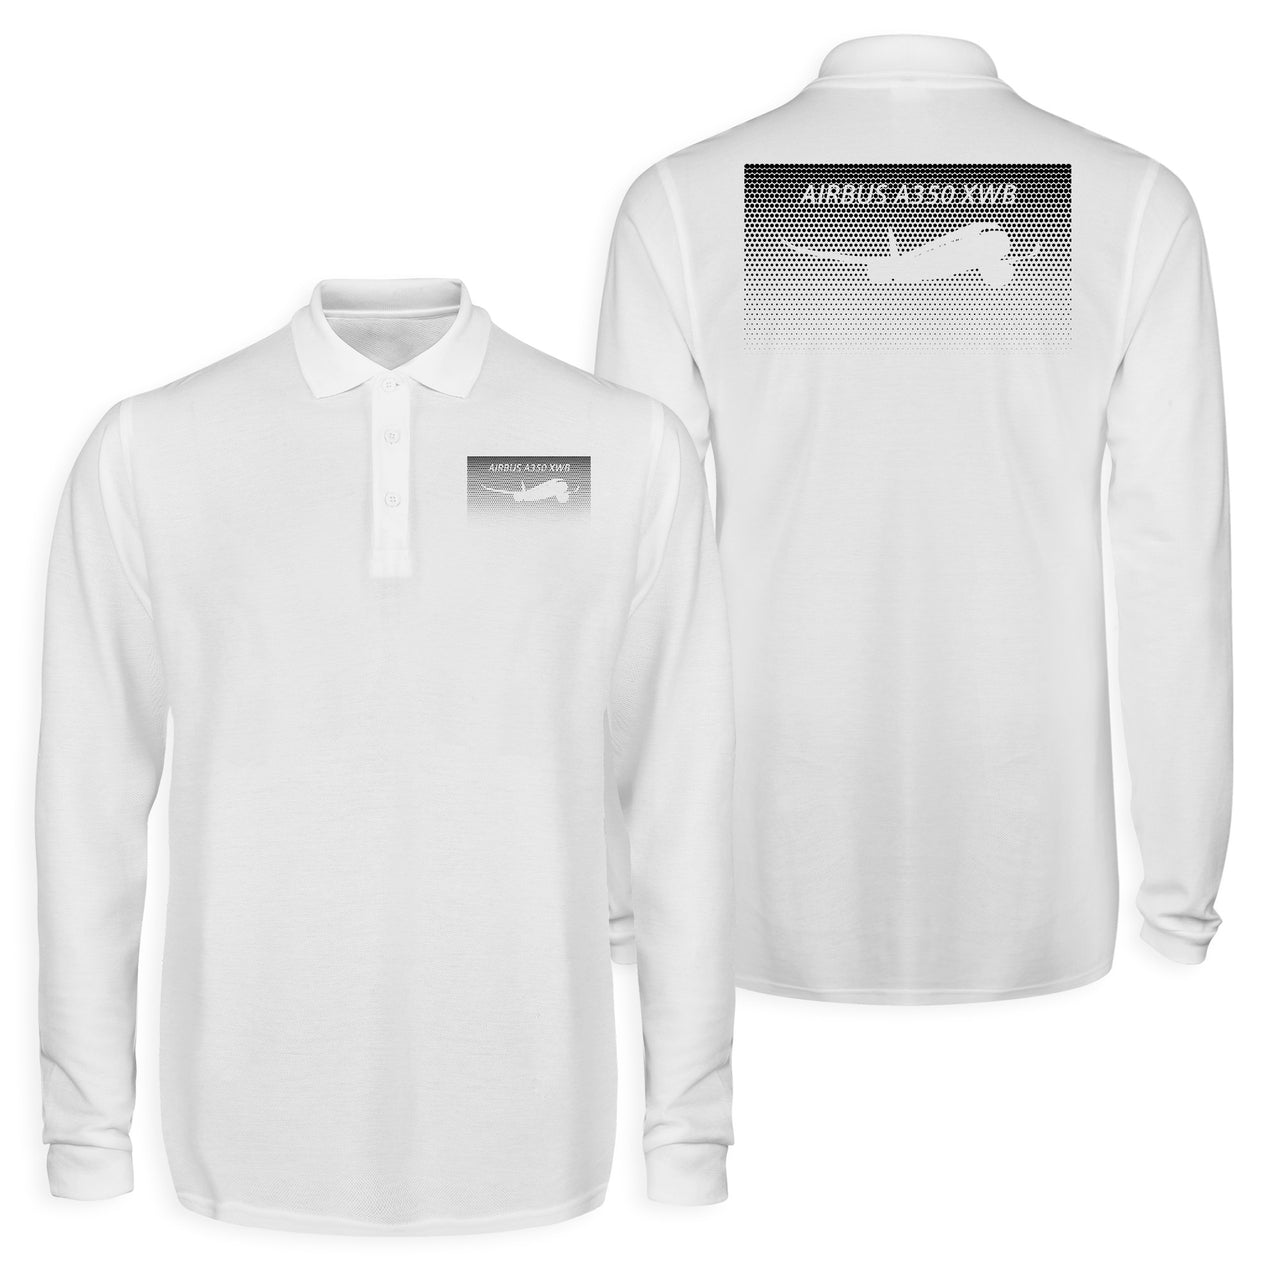 Airbus A350XWB & Dots Designed Long Sleeve Polo T-Shirts (Double-Side)